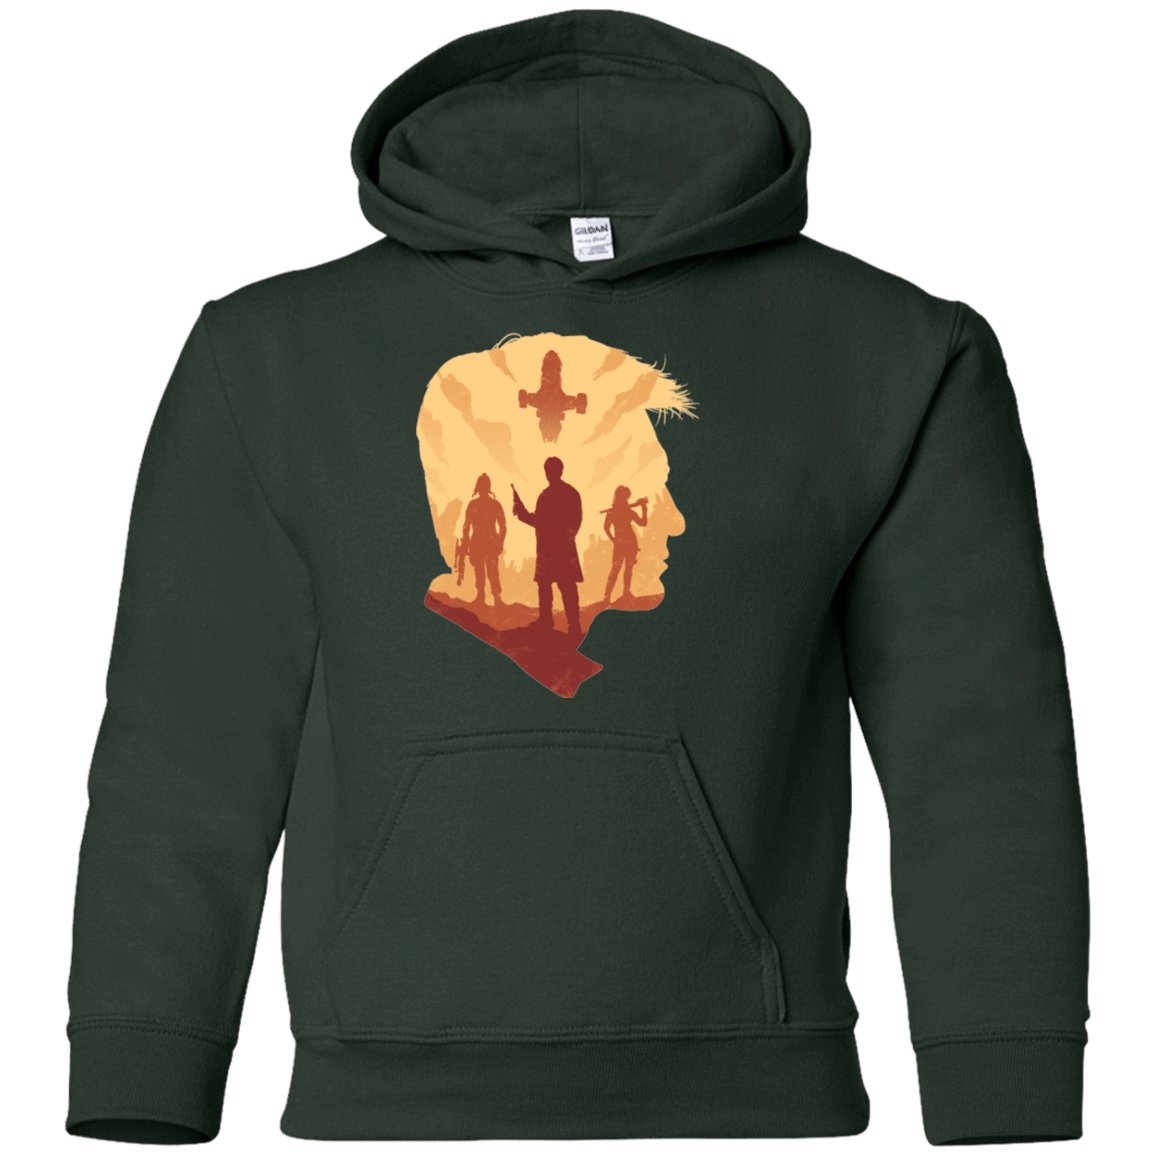 Sweatshirts Forest Green / YS Smuggle squad Youth Hoodie